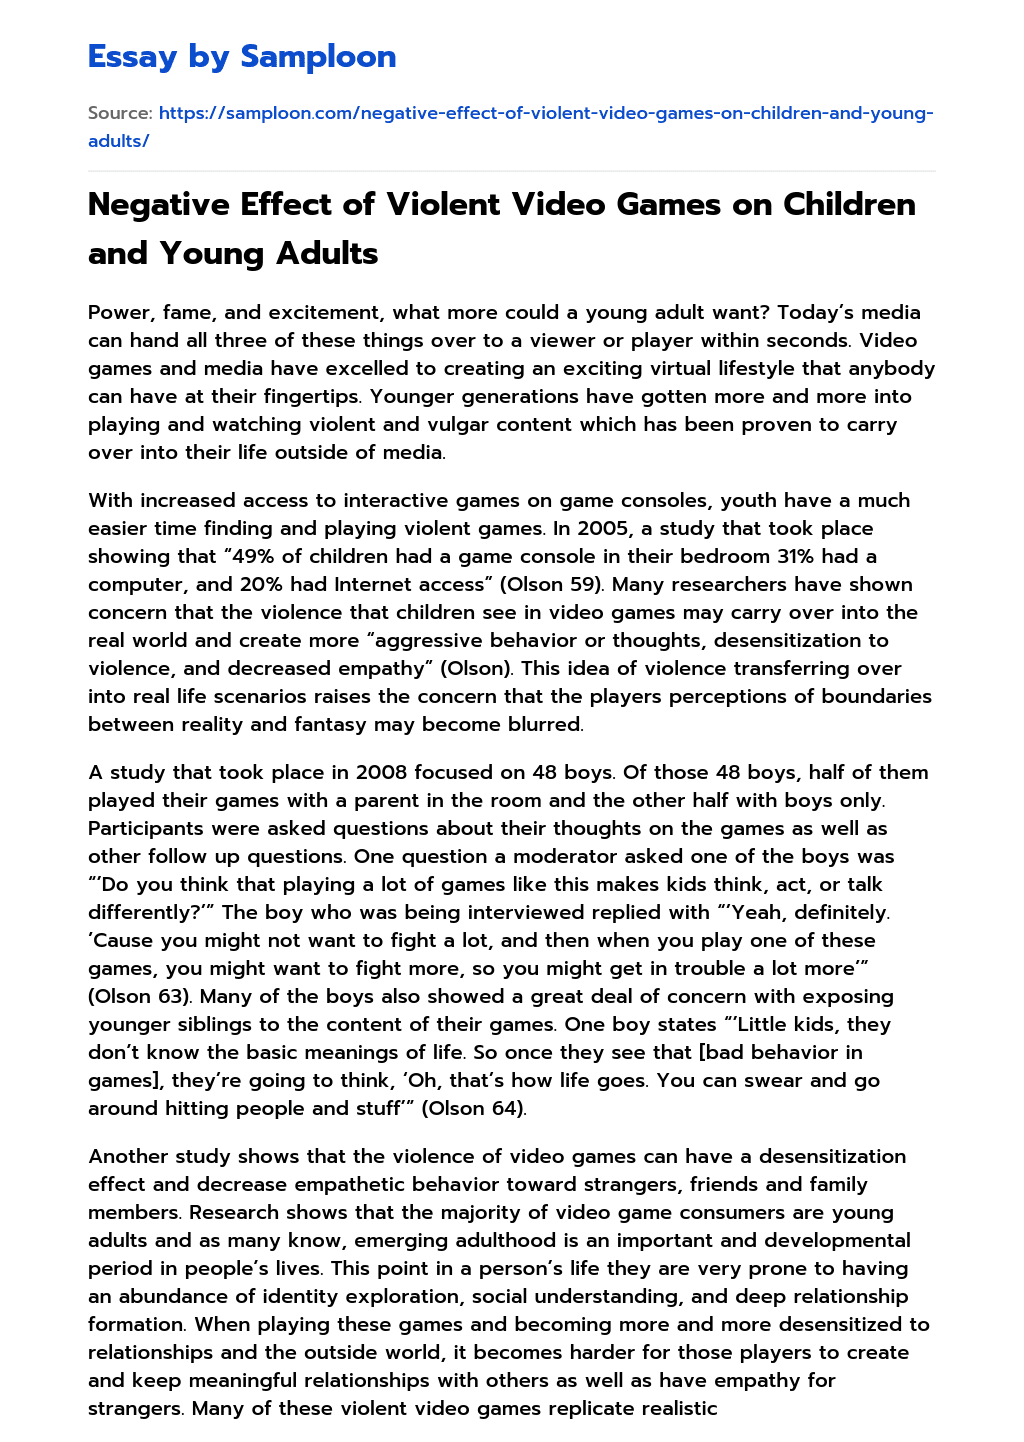 Negative Effect of Violent Video Games on Children and Young Adults essay